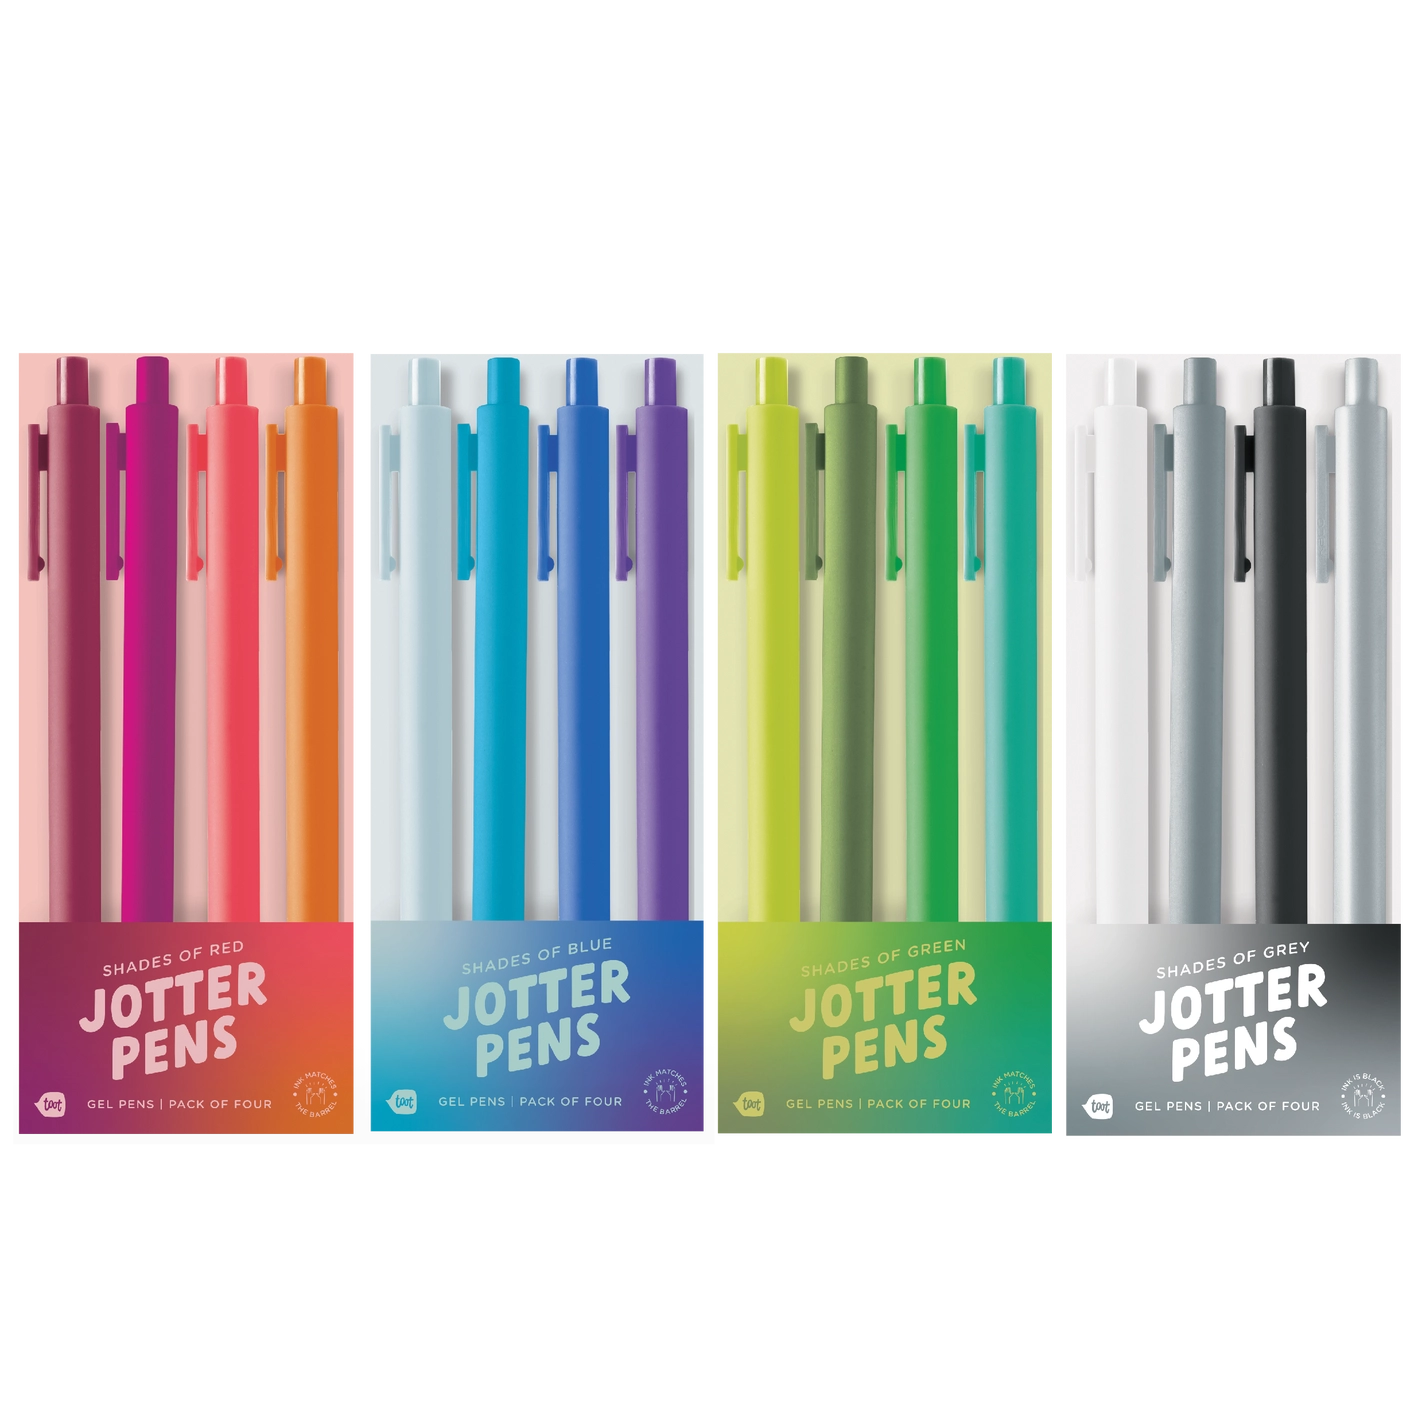 Shades of Green Gradient Jotter Sets